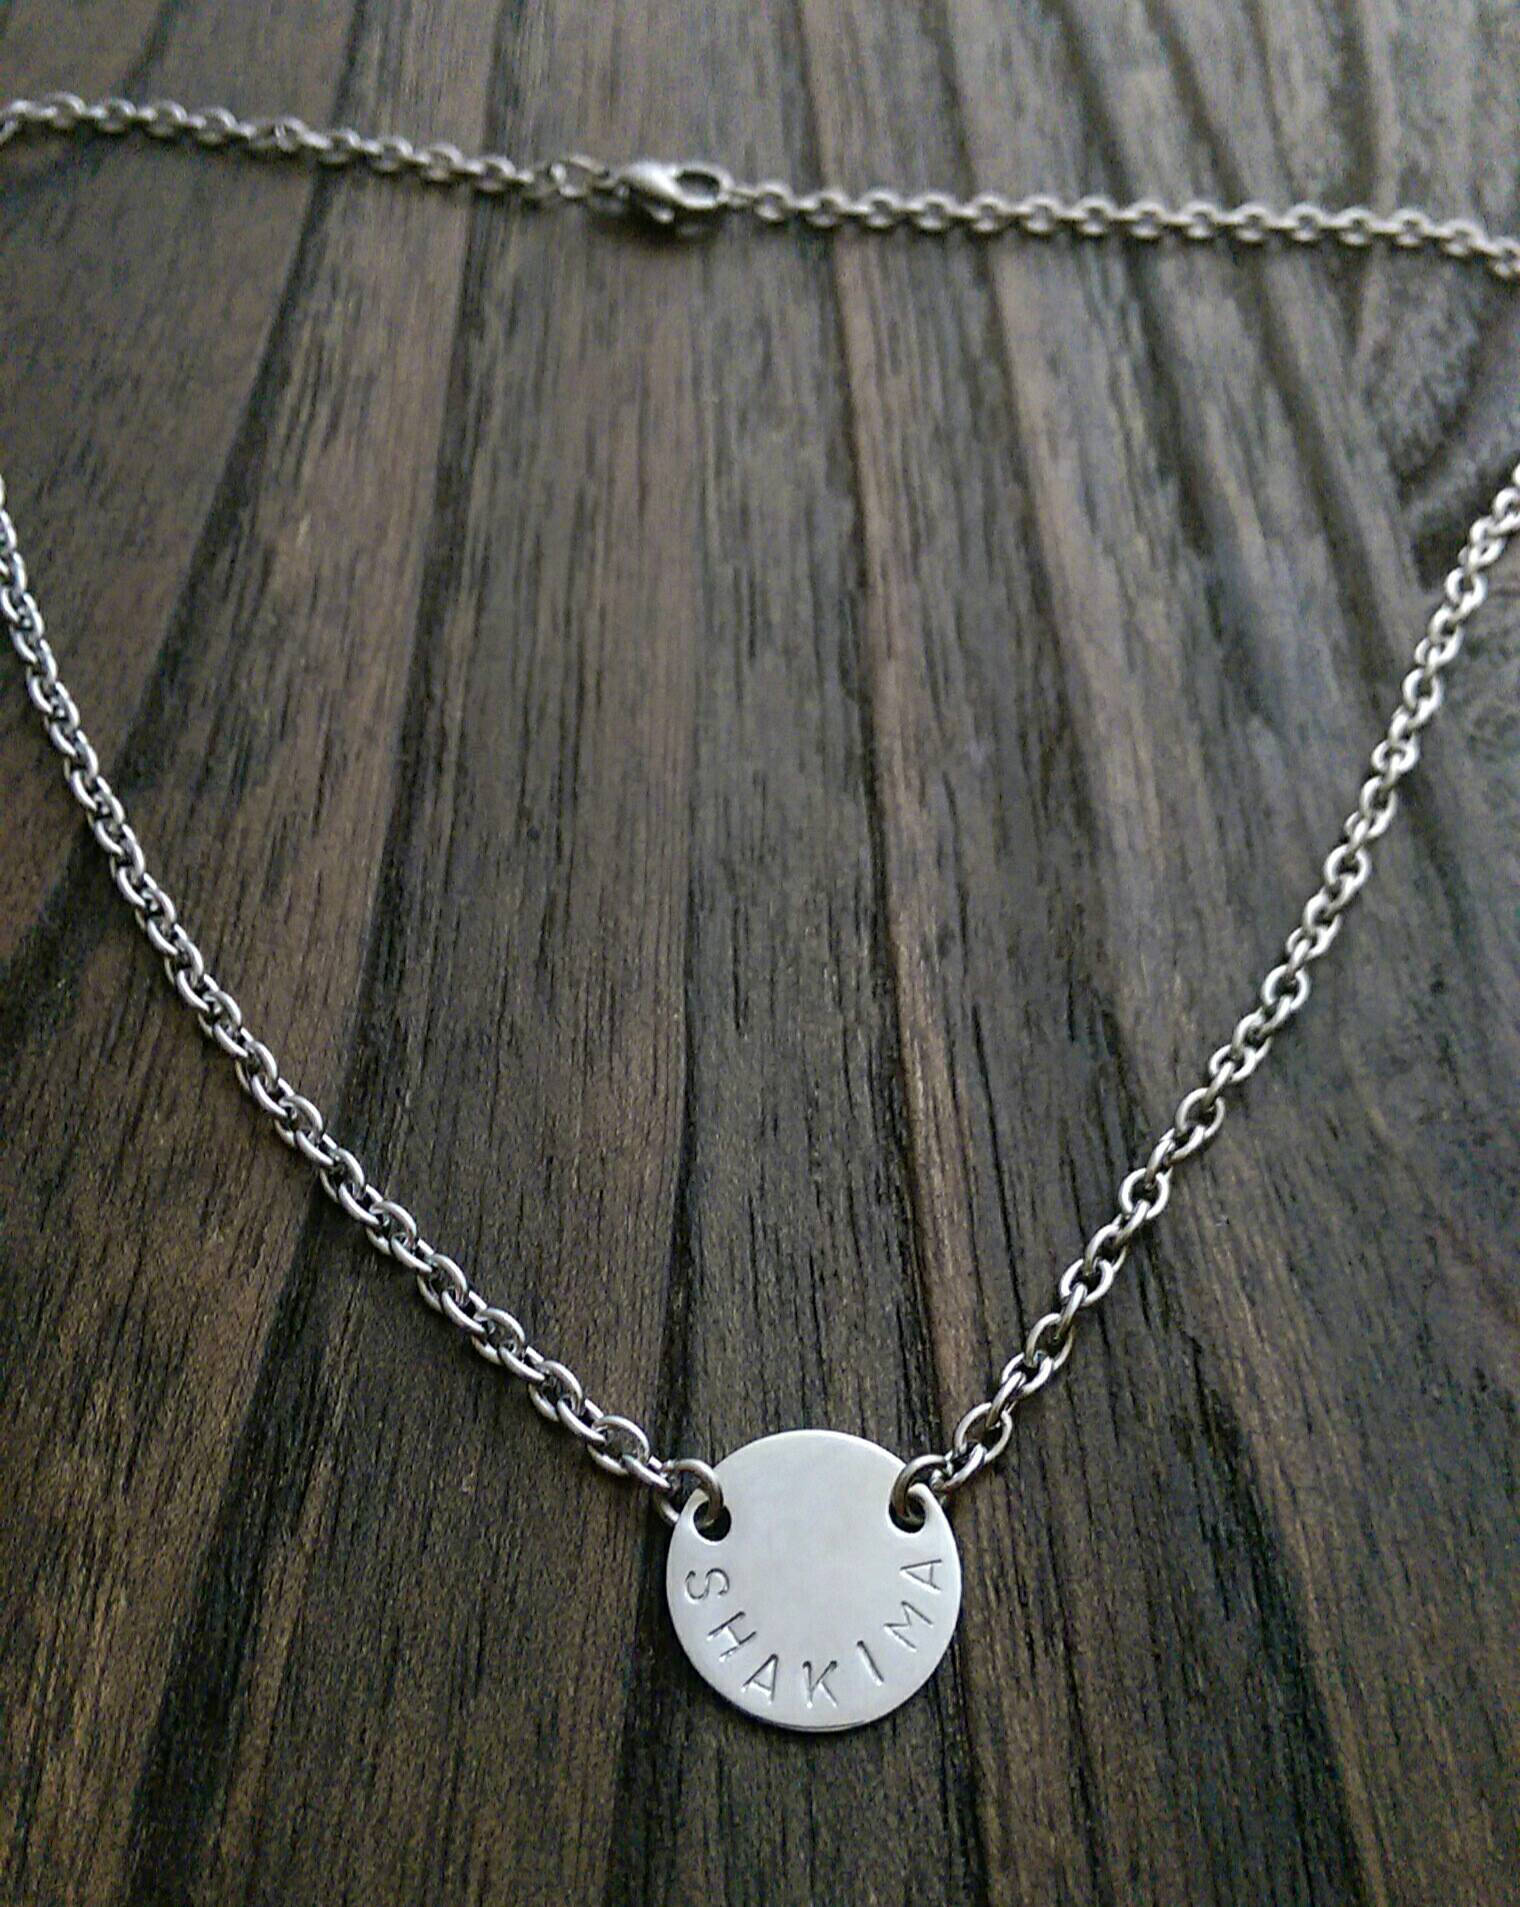 Personalised Hand Stamped Circle 15mm Disc Necklace Pendant Stainless Steel. - Silver and Resin Designs